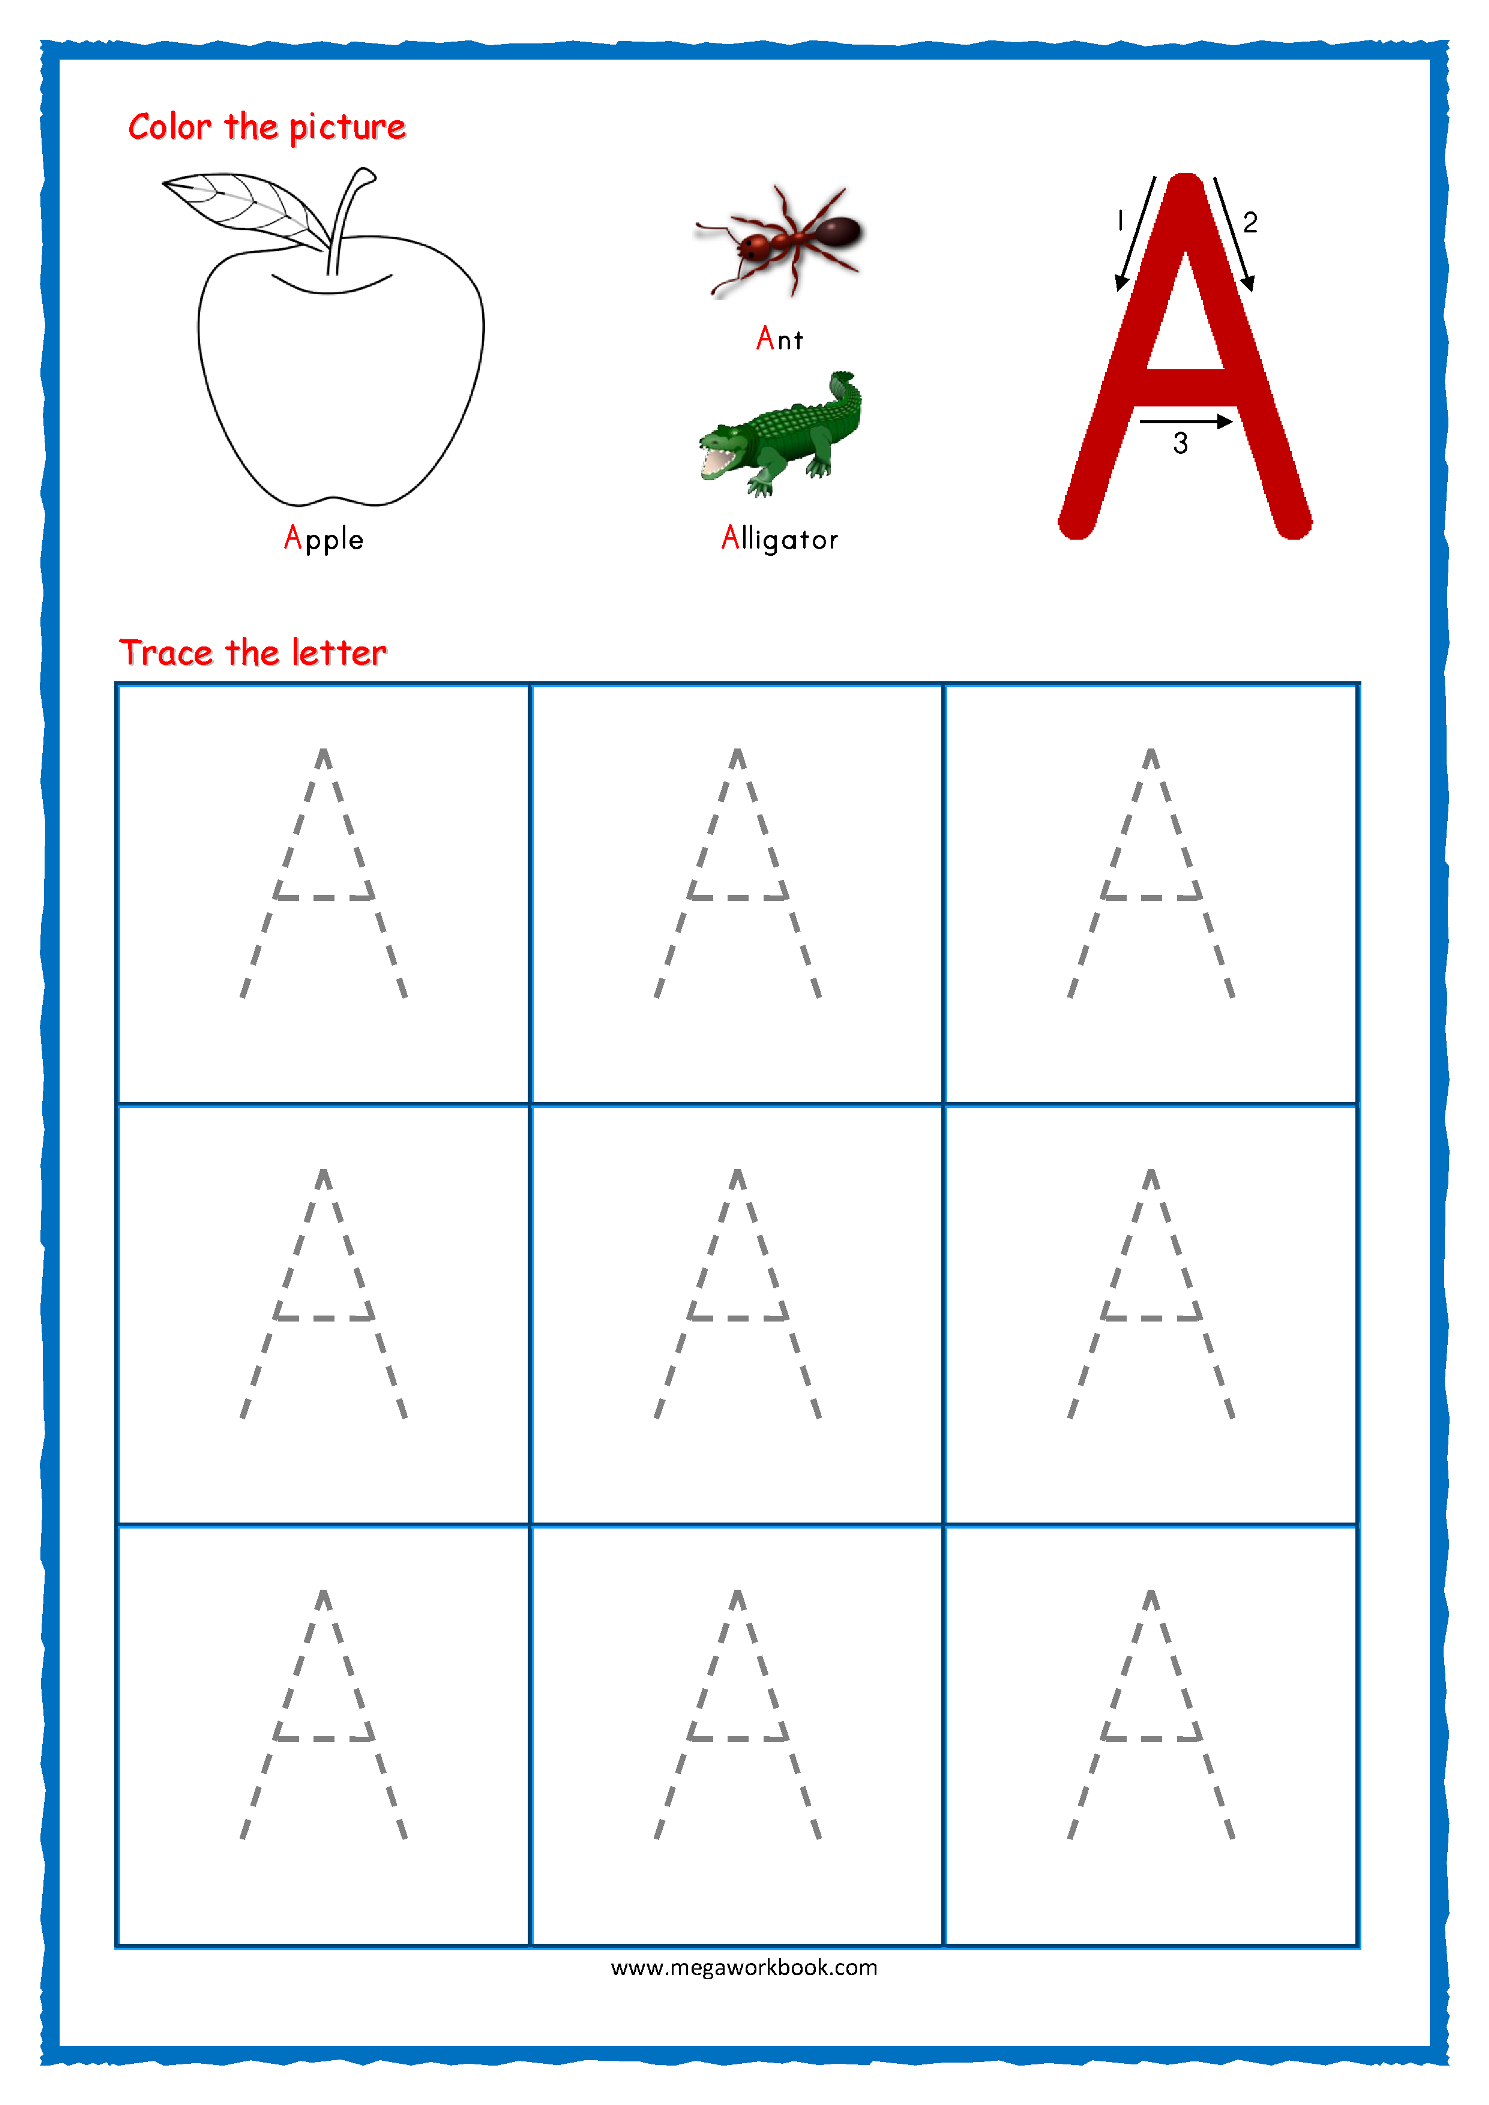 Coloring Book : Printable Letter Tracing Sheets For in Alphabet Tracing Worksheets For Kindergarten